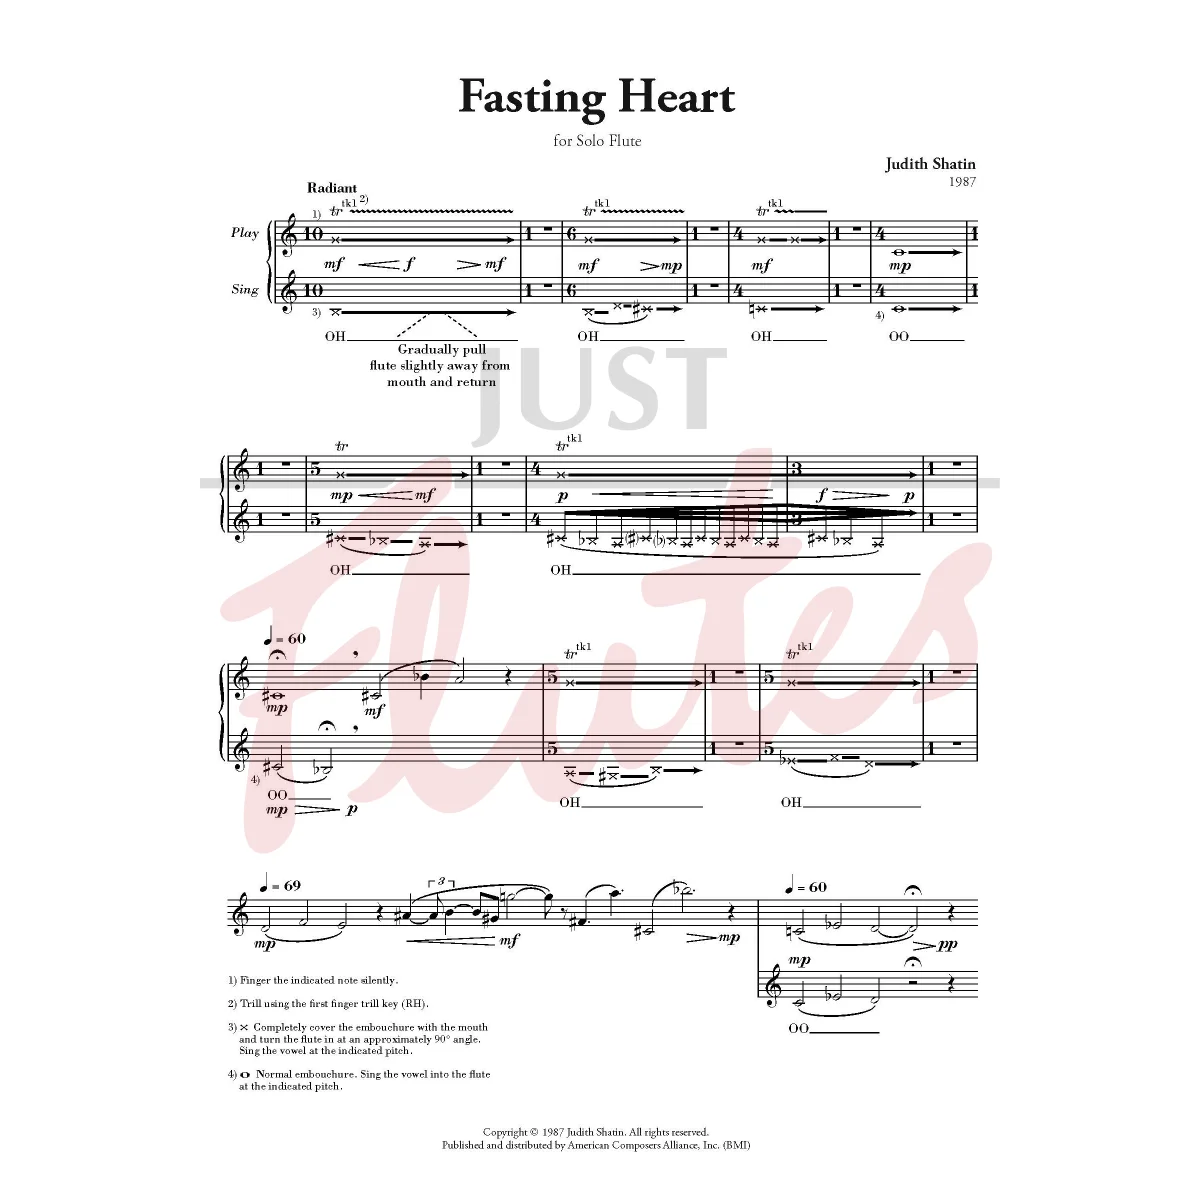 Fasting Heart for Solo Flute